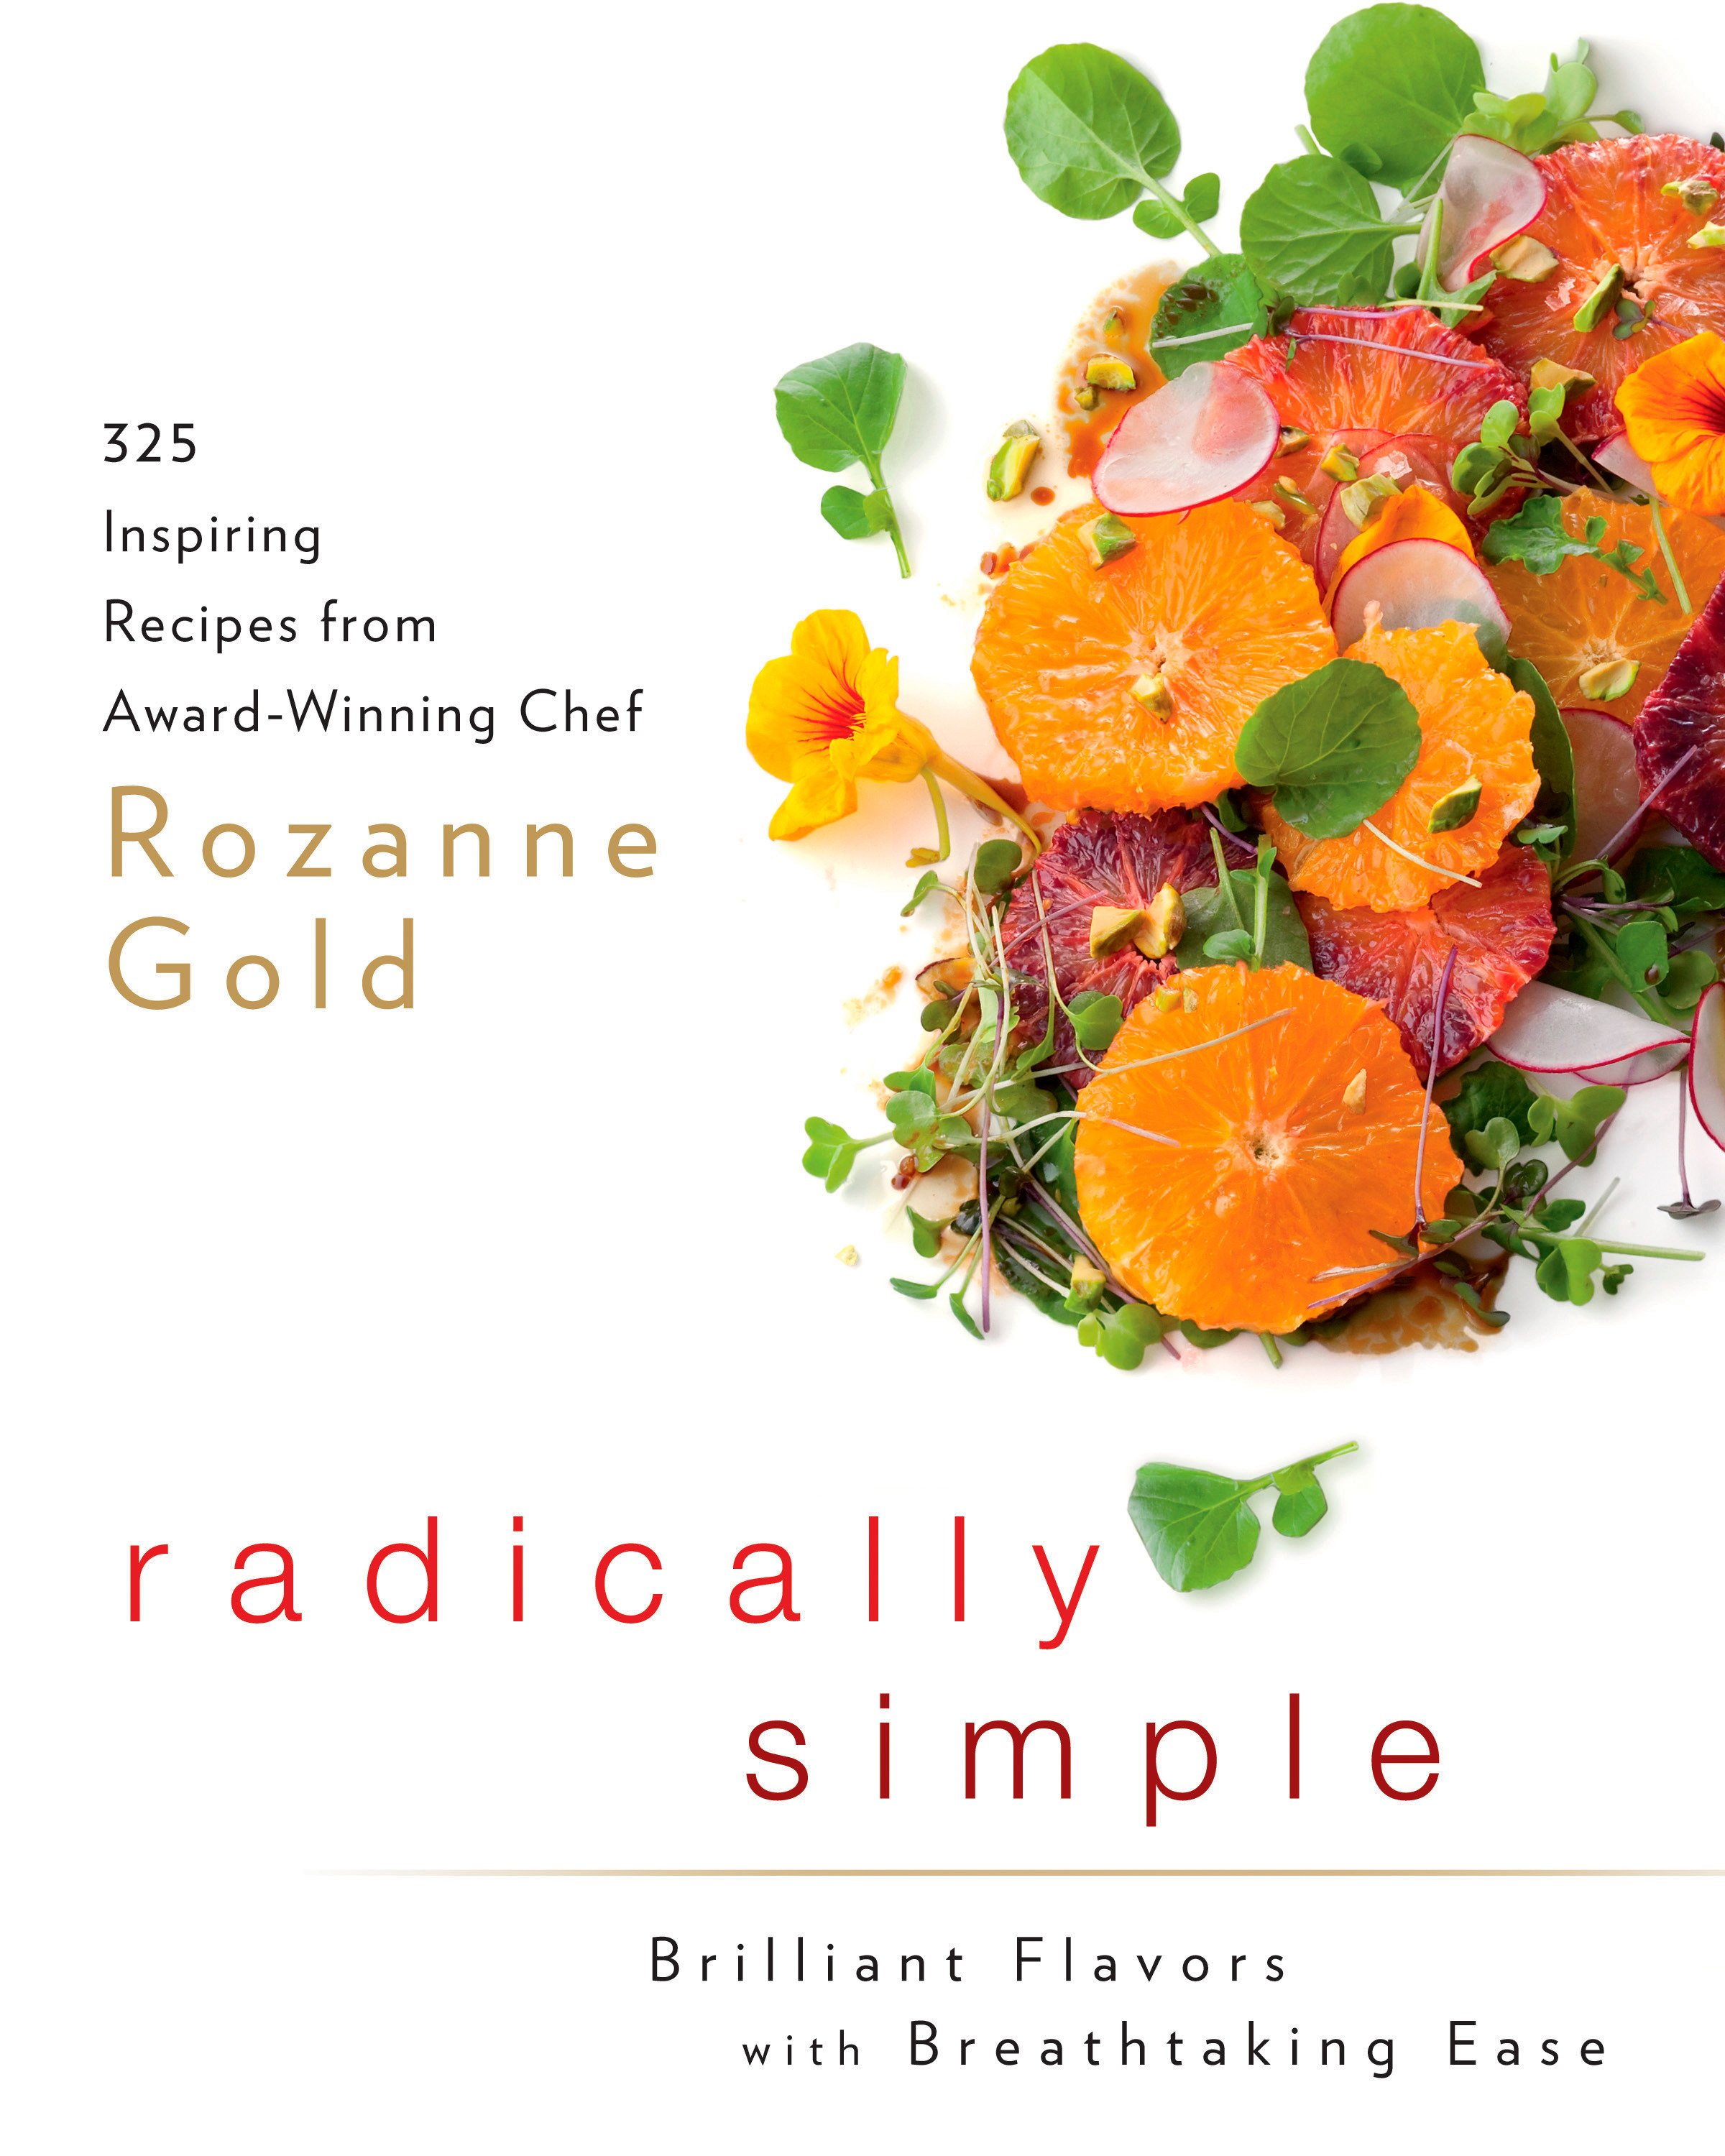 Radically Simple: Brilliant Flavors with Breathtaking Ease : 325 Inspiring Recipes from Award-Winning Chef Rozanne Gold: A Cookbook - image 1 of 1